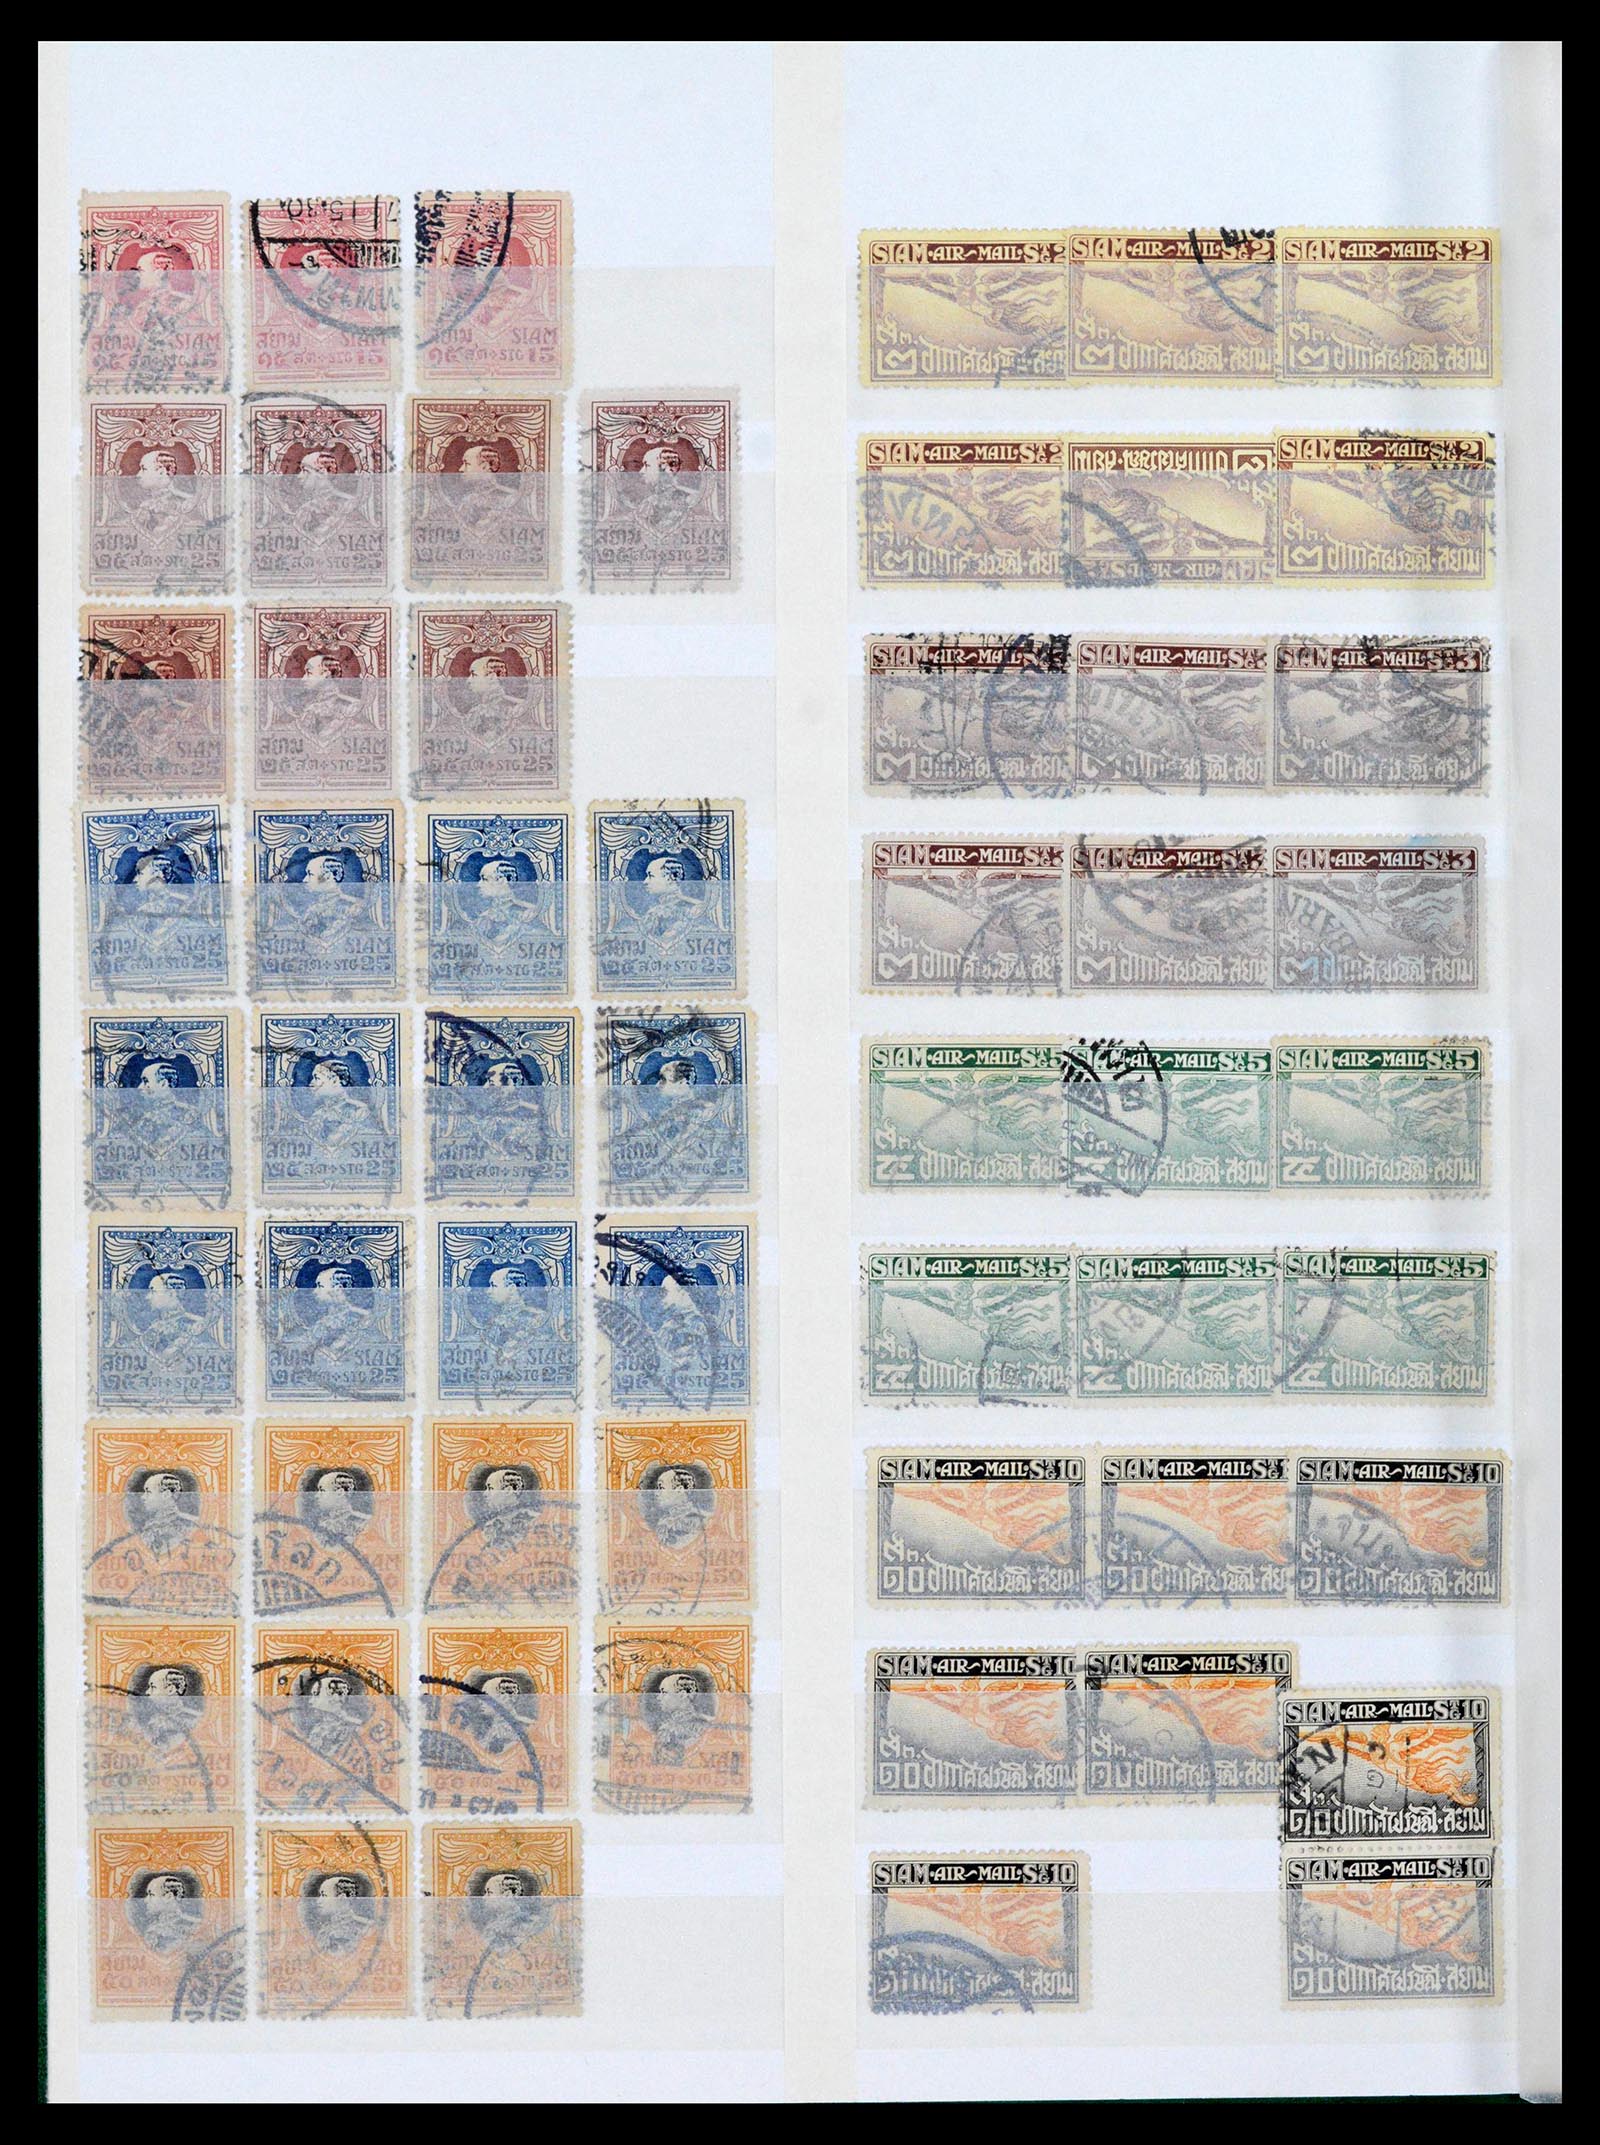 39384 0012 - Stamp collection 39384 Thailand 1883-2014.